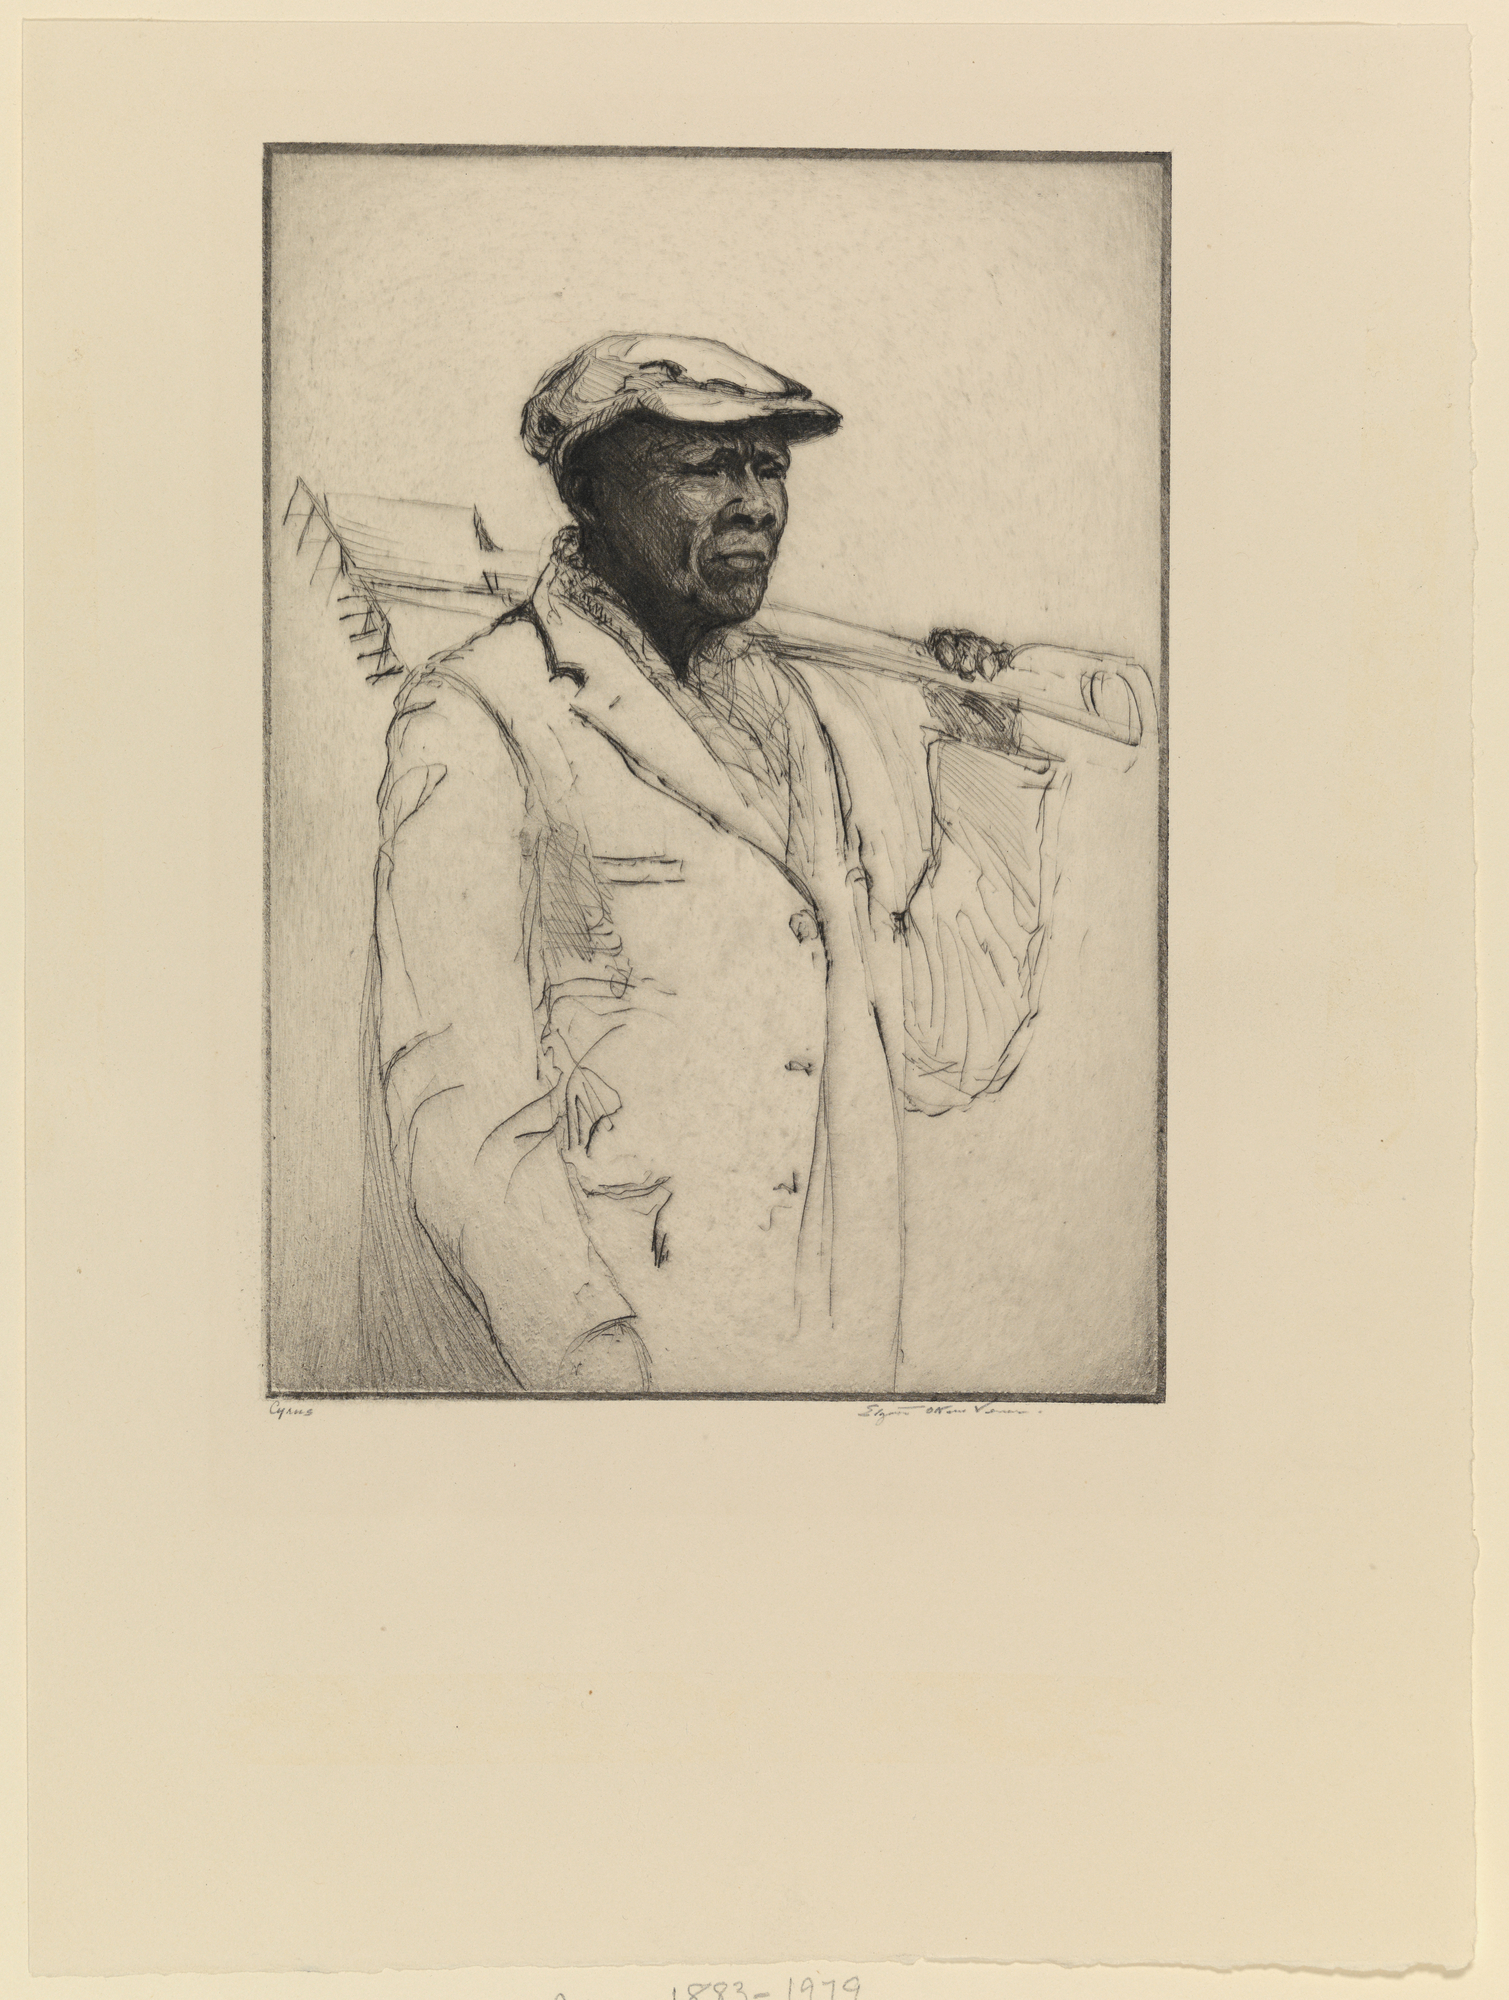 Half length portrait of an African American man with furrowed brow, wearing a newsboy cap, coat, and scarf. Man holds a rake and shovel over his shoulder.